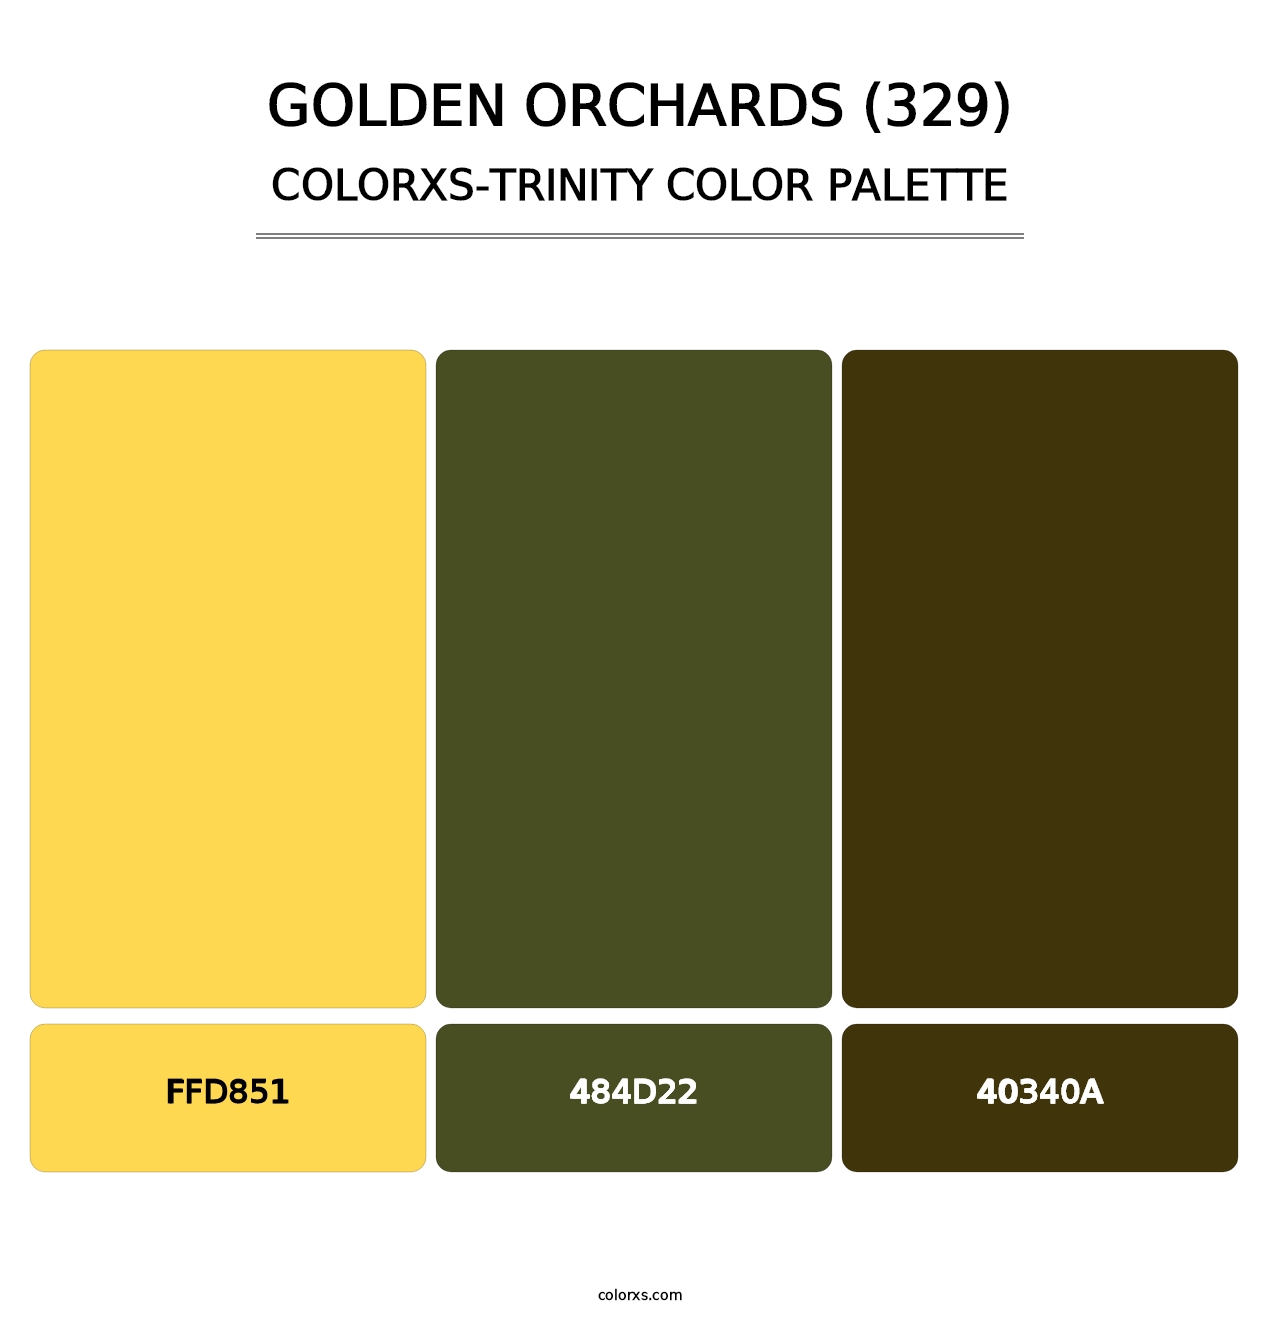 Golden Orchards (329) - Colorxs Trinity Palette